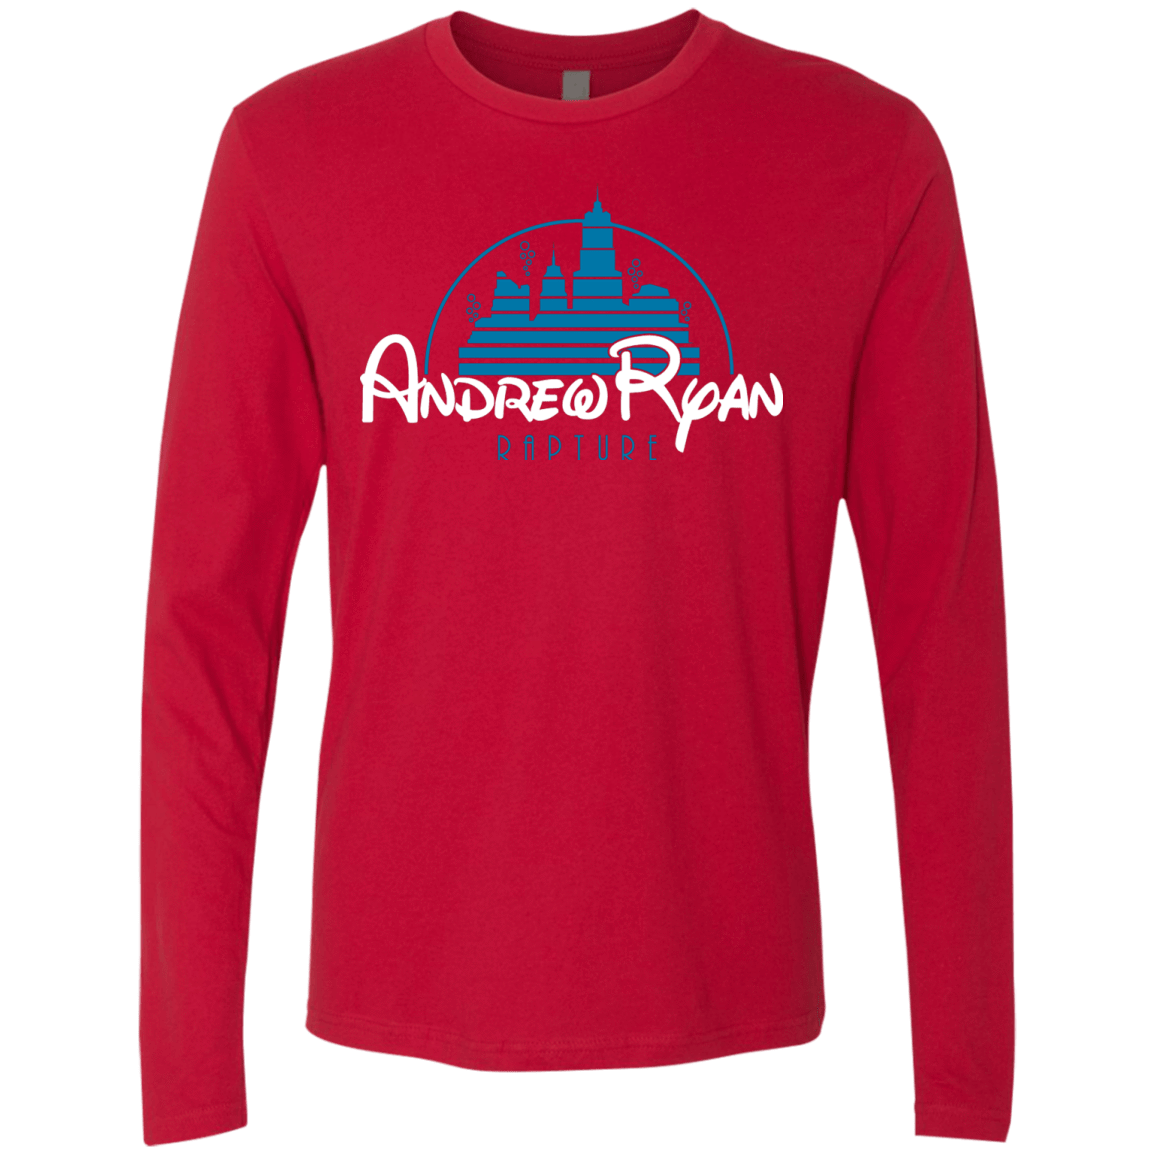 T-Shirts Red / Small ANDREWRYAN Men's Premium Long Sleeve